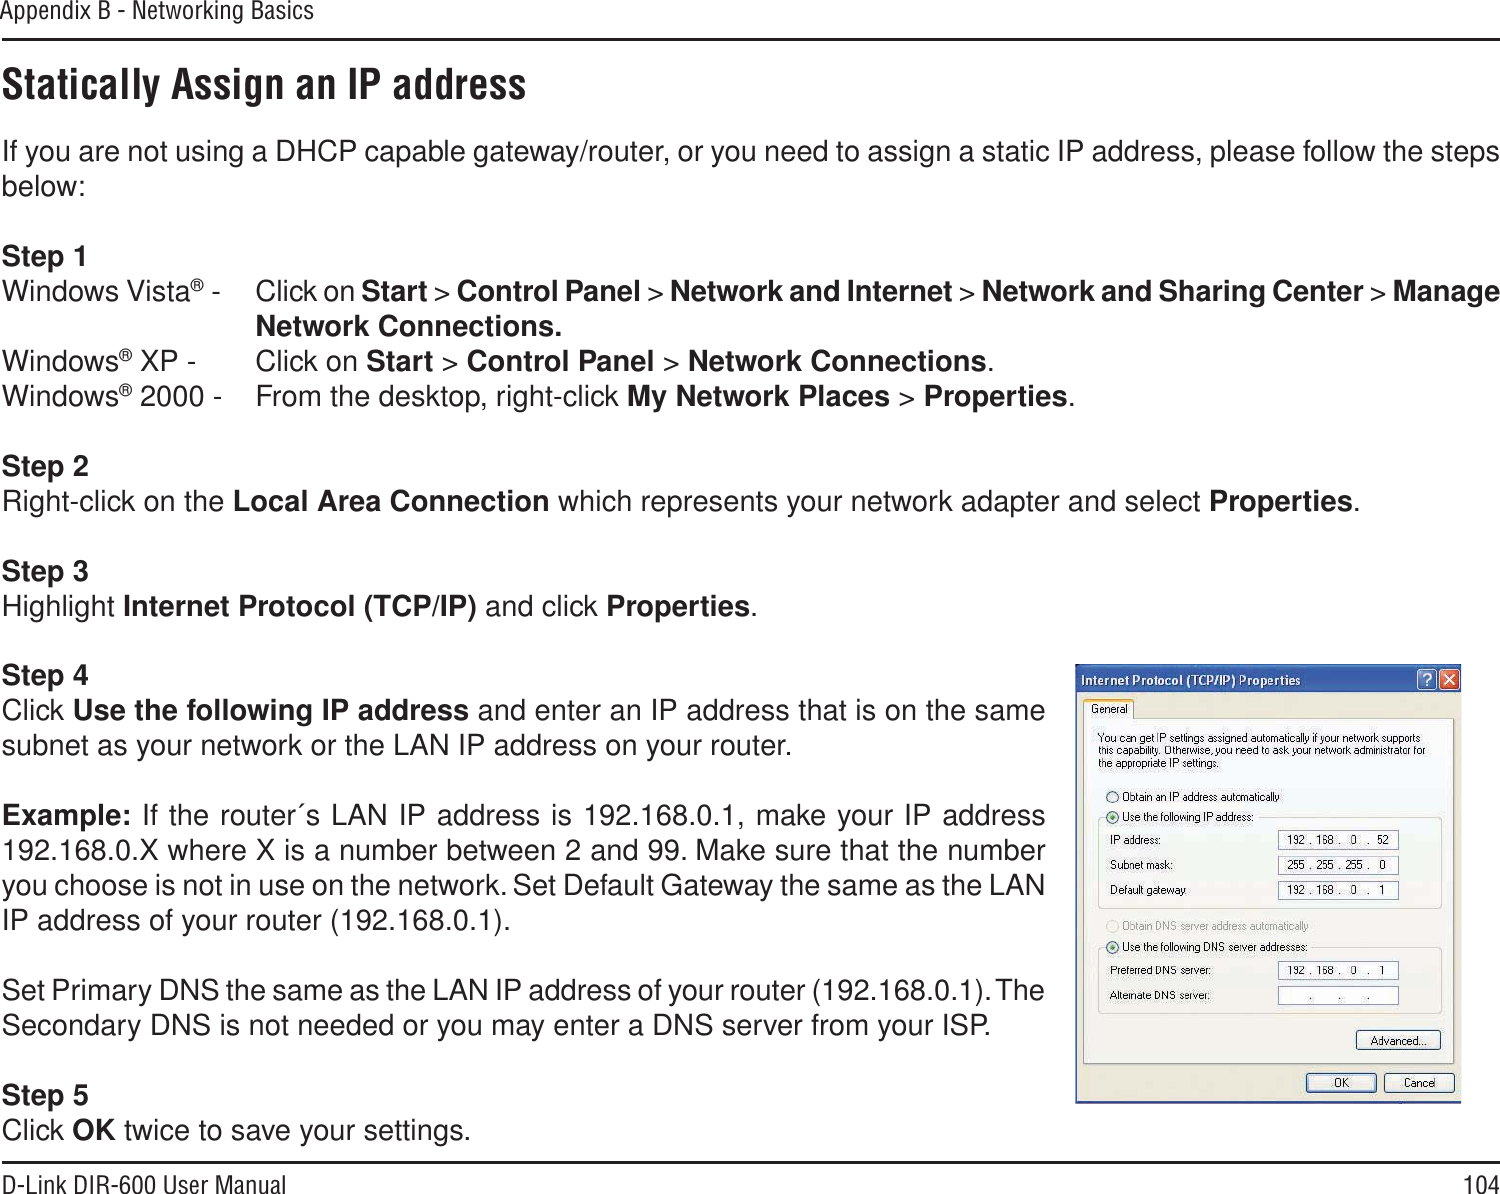 104D-Link DIR-600 User ManualAppendix B - Networking BasicsStatically Assign an IP addressIf you are not using a DHCP capable gateway/router, or you need to assign a static IP address, please follow the steps below:Step 1Windows Vista® - Click on Start &gt; Control Panel &gt; Network and Internet &gt; Network and Sharing Center &gt; ManageNetwork Connections.Windows® XP - Click on Start &gt; Control Panel &gt; Network Connections.Windows® 2000 - From the desktop, right-click My Network Places &gt; Properties.Step 2Right-click on the Local Area Connection which represents your network adapter and select Properties.Step 3Highlight Internet Protocol (TCP/IP) and click Properties.Step 4Click Use the following IP address and enter an IP address that is on the same subnet as your network or the LAN IP address on your router. Example: If the router´s LAN IP address is 192.168.0.1, make your IP address 192.168.0.X where X is a number between 2 and 99. Make sure that the number you choose is not in use on the network. Set Default Gateway the same as the LAN IP address of your router (192.168.0.1). Set Primary DNS the same as the LAN IP address of your router (192.168.0.1). The Secondary DNS is not needed or you may enter a DNS server from your ISP.Step 5Click OK twice to save your settings.